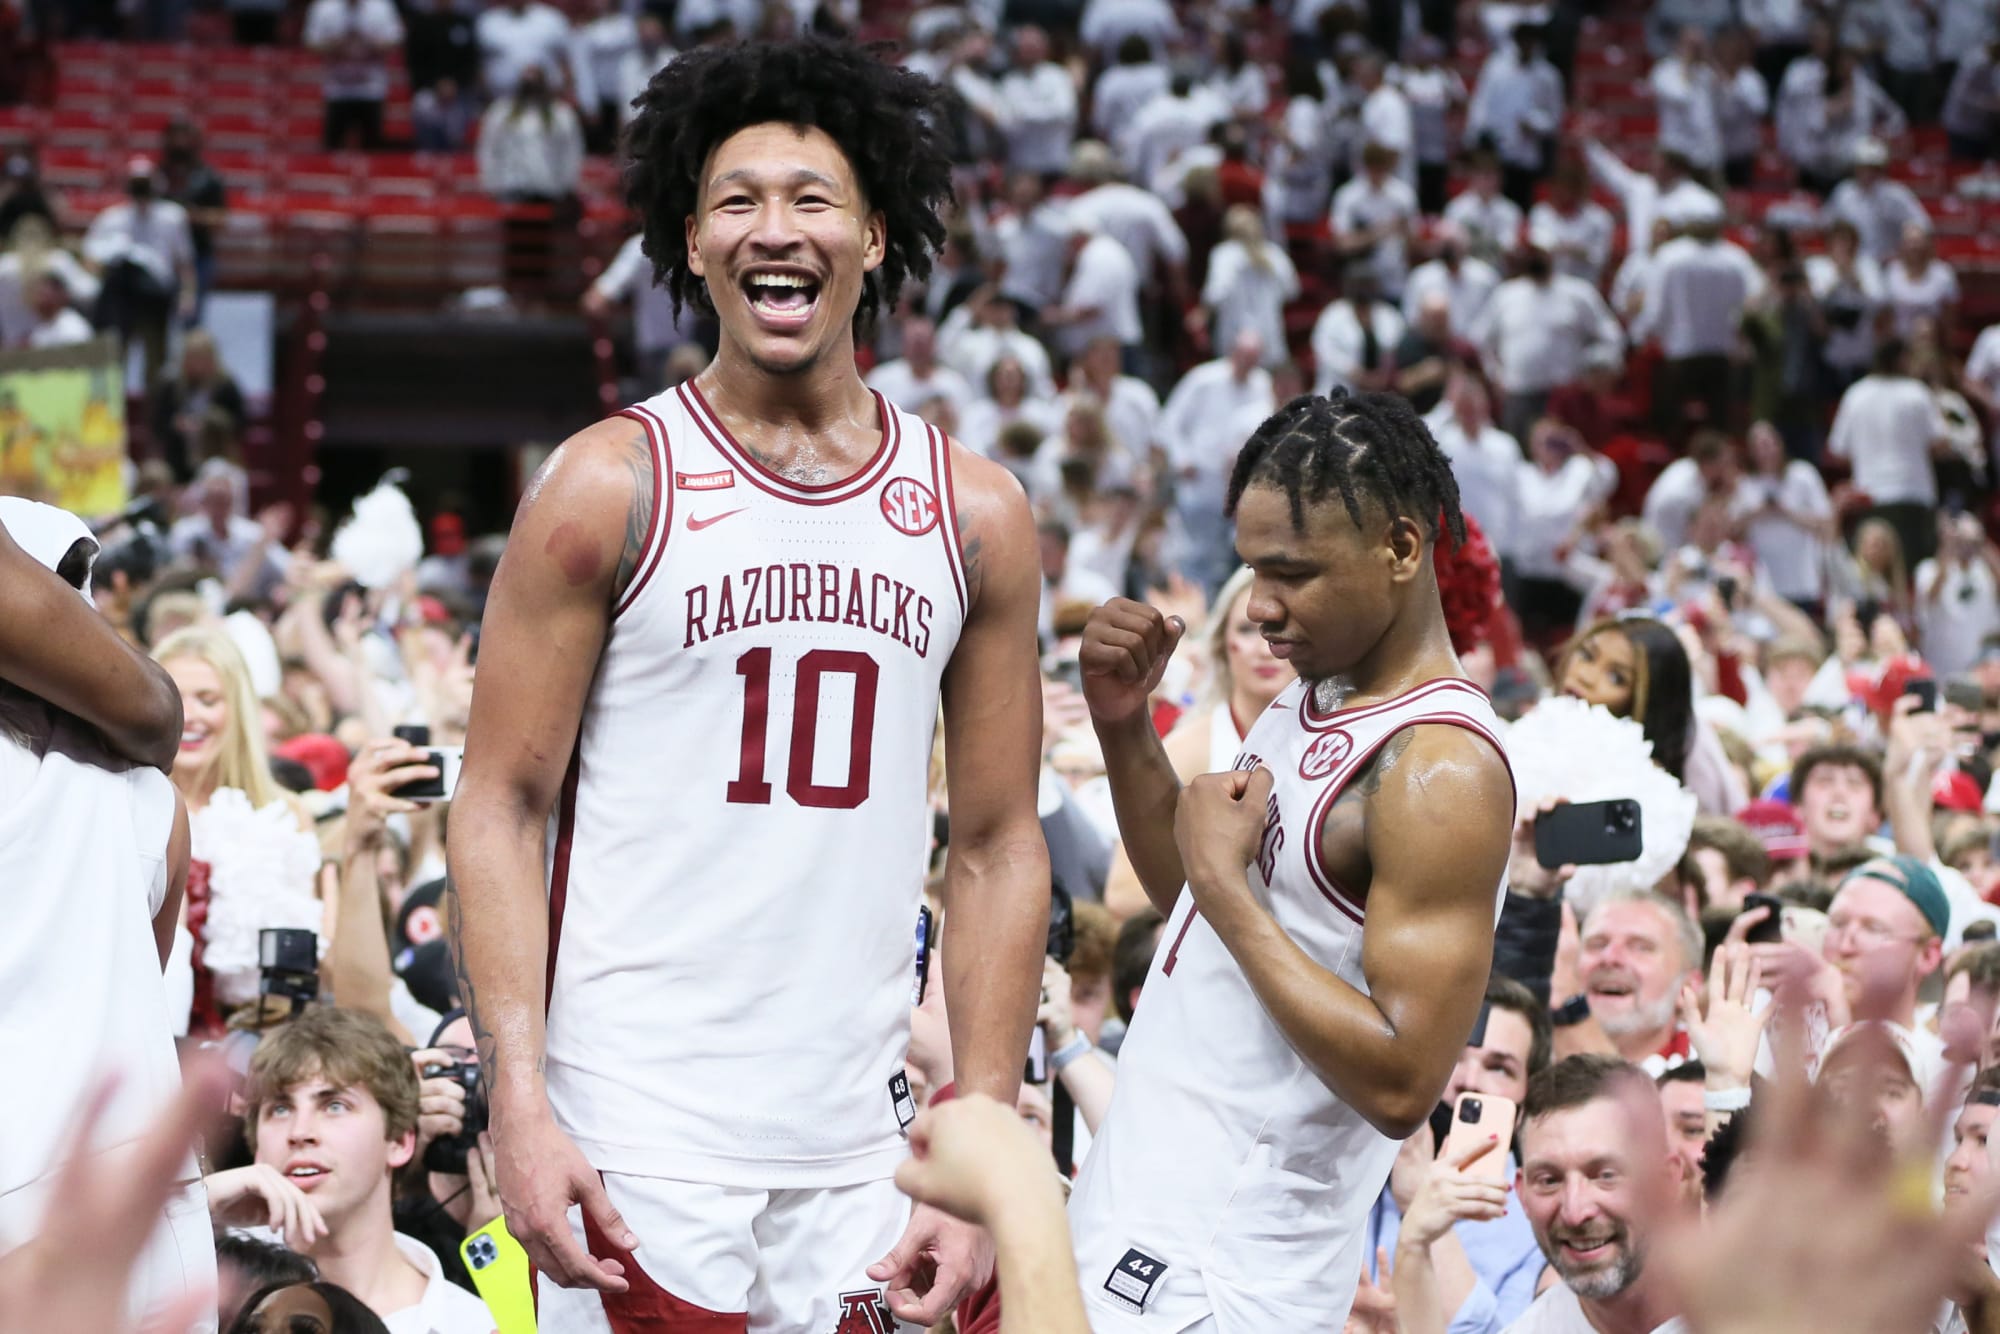 Arkansas Basketball team ranked in Top 25 for first time in nine weeks